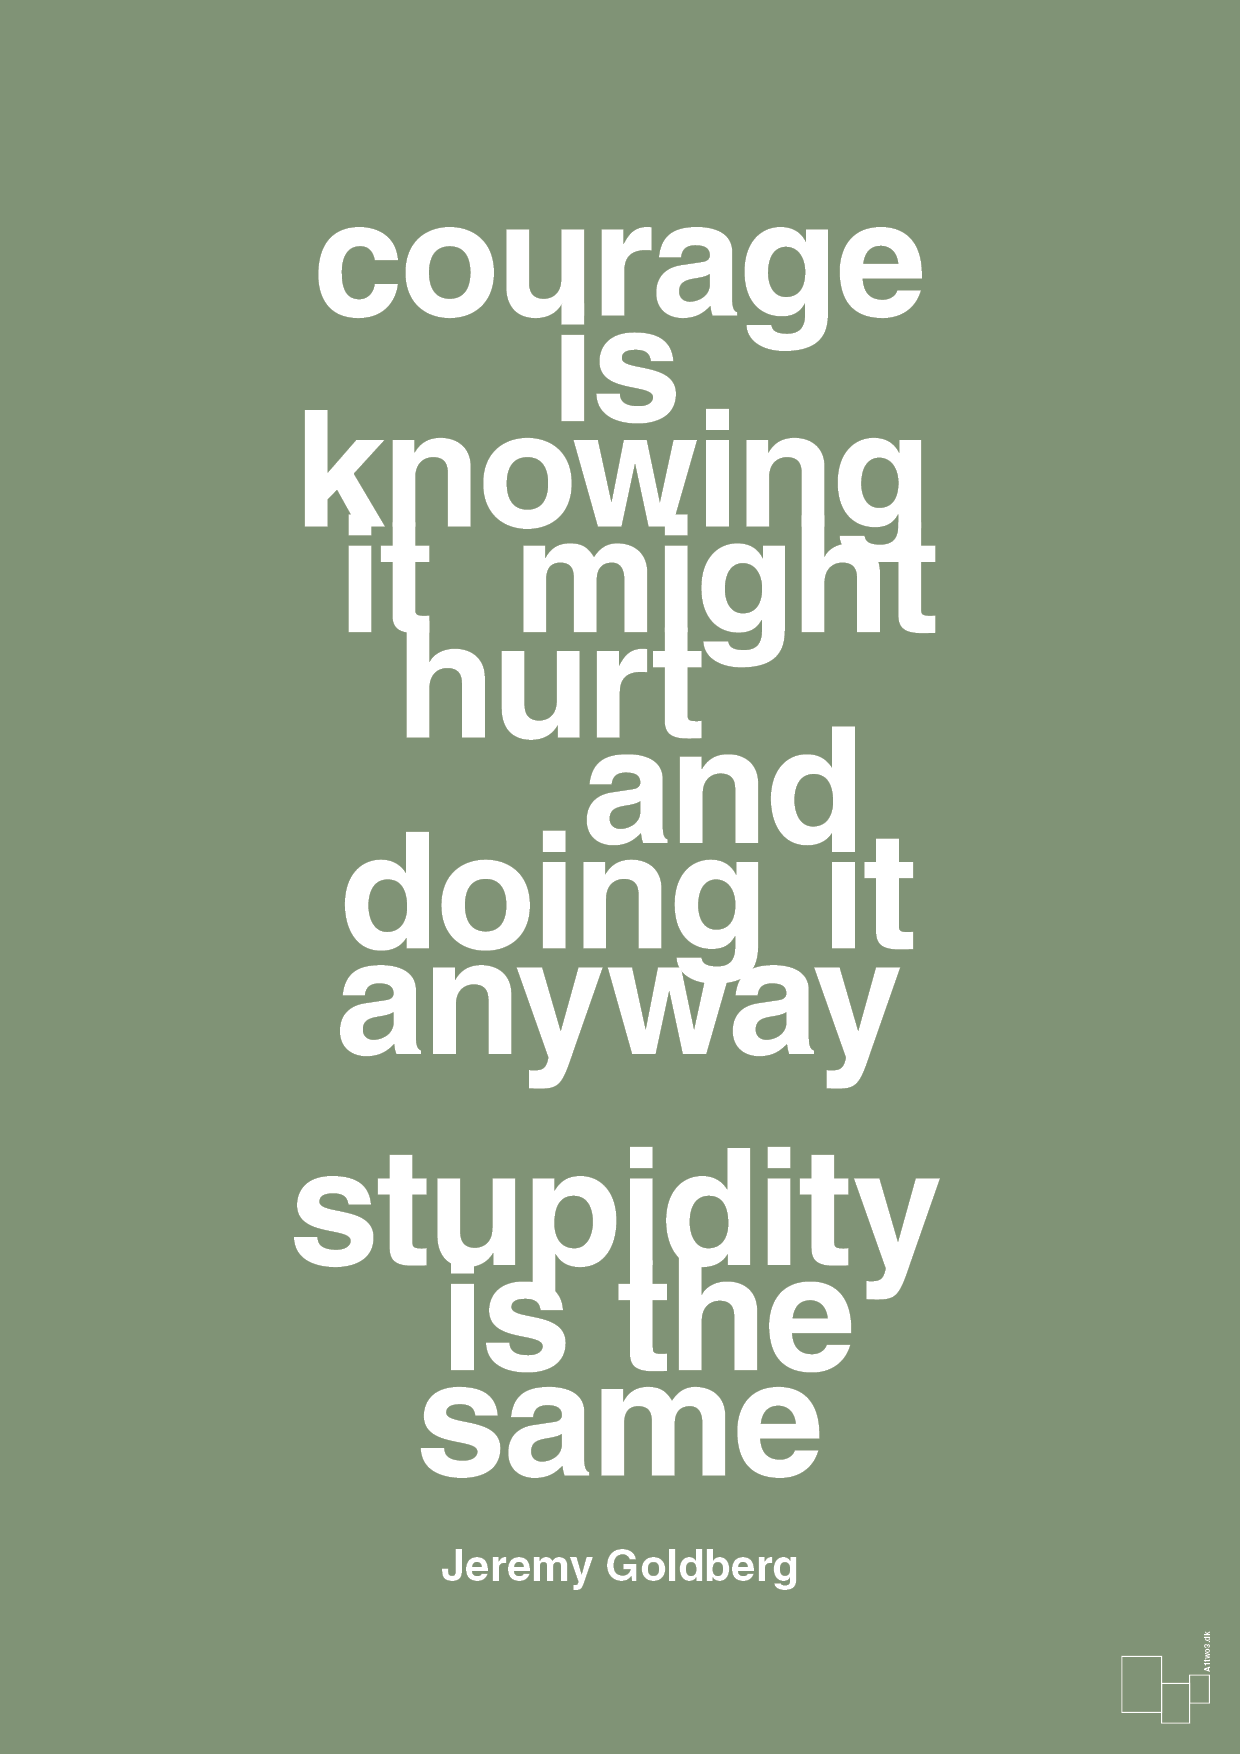 courage is knowing it might hurt and doing it anyway stupidity is the same - Plakat med Citater i Jade